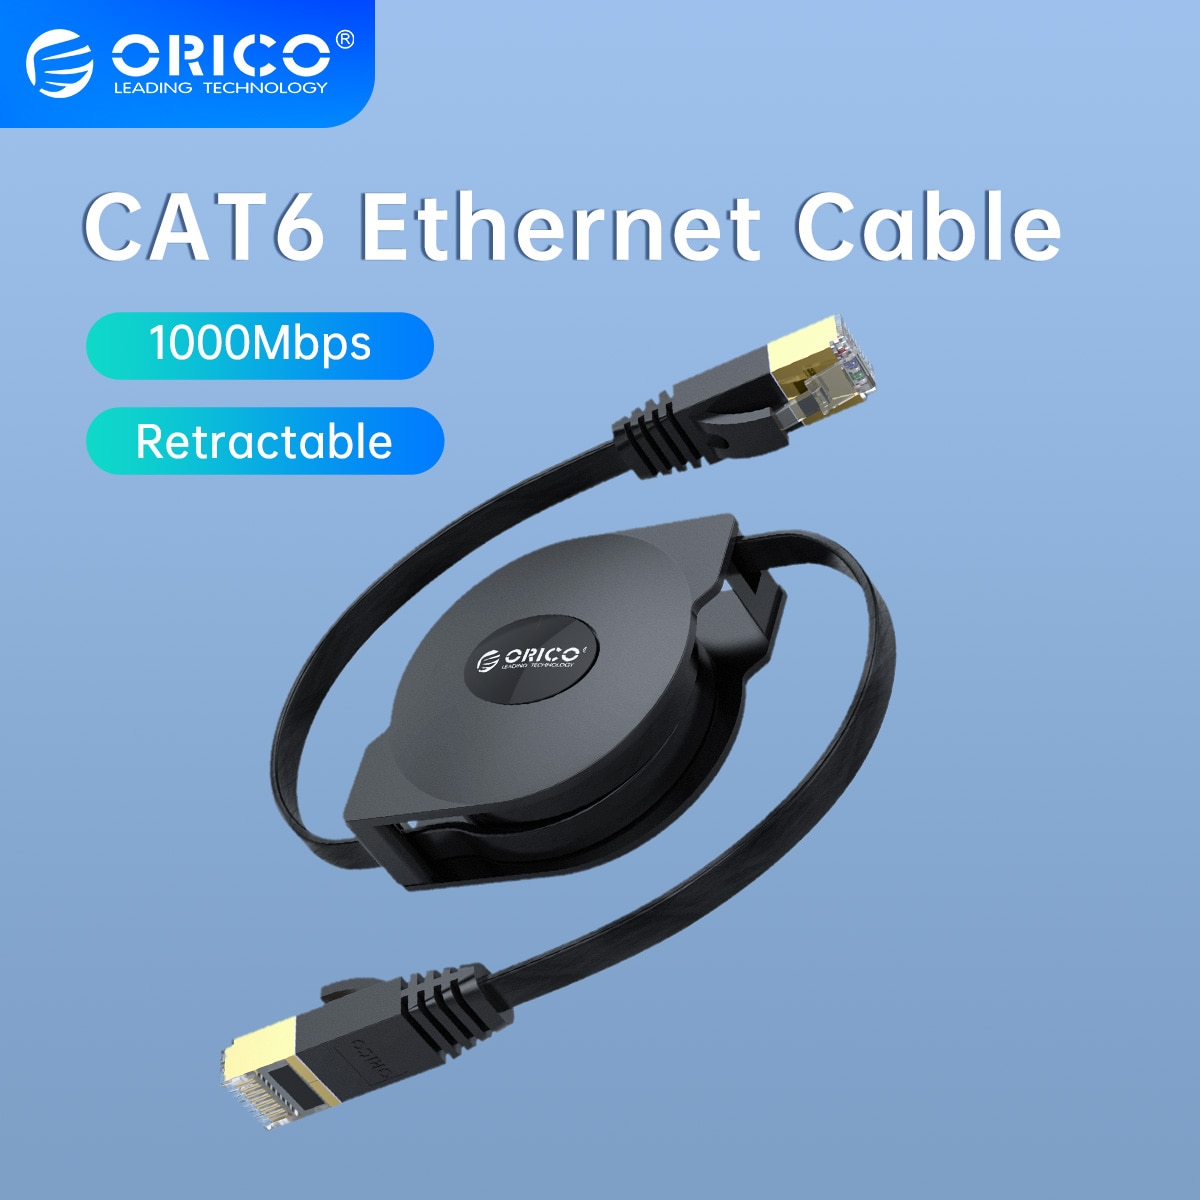 ORICO CAT6 Ethernet Cable Portable Retractable Ethernet LAN Internet Network Cable for Laptop Router Network Cables 1000Mbps 2M